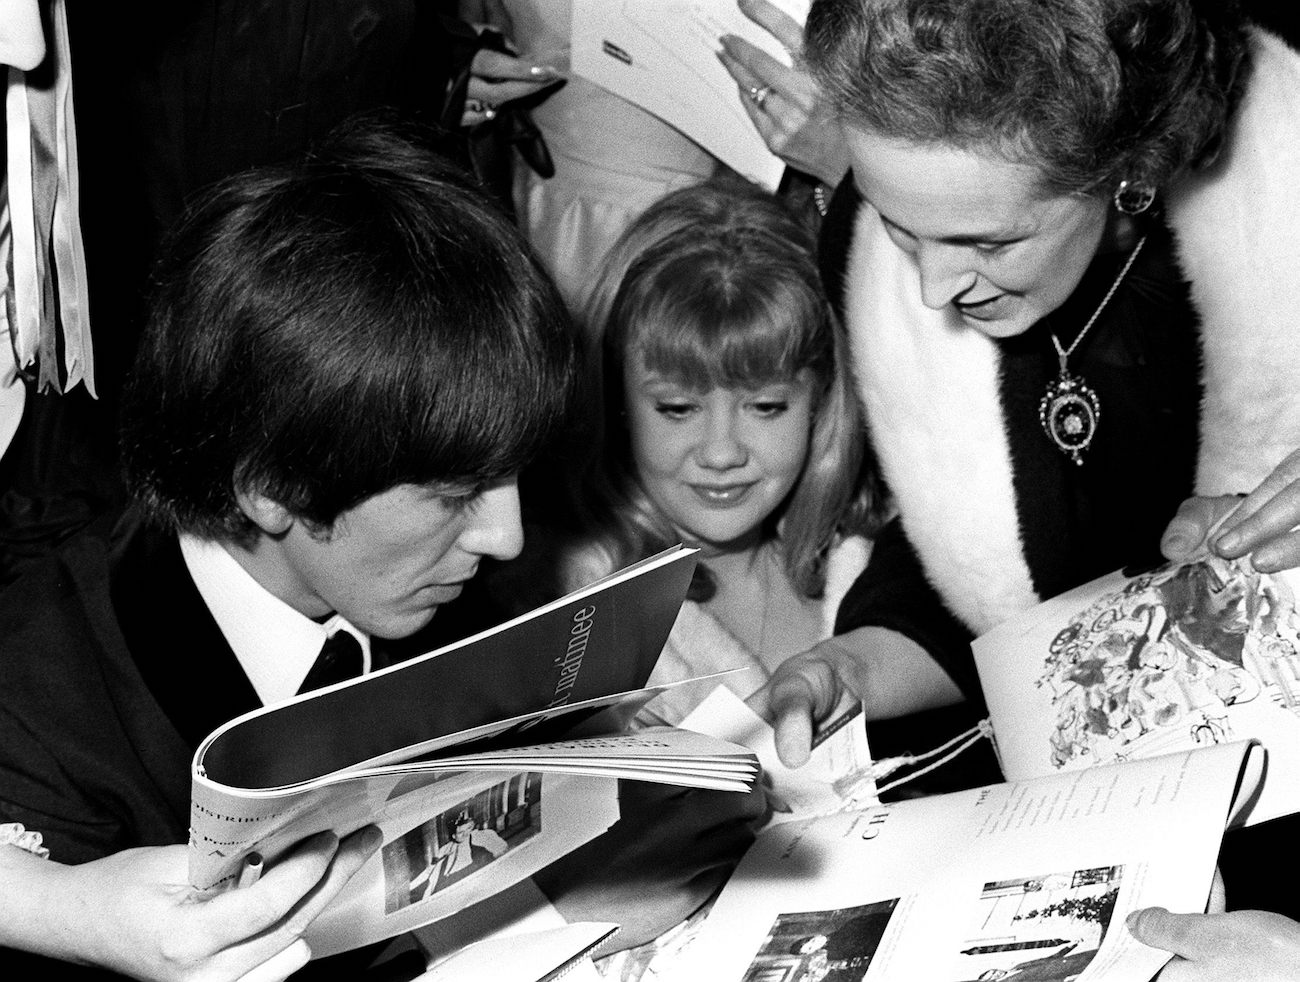 George Harrison and Hayley Mills at the Regal Cinema as fans crowd them for autographs. 